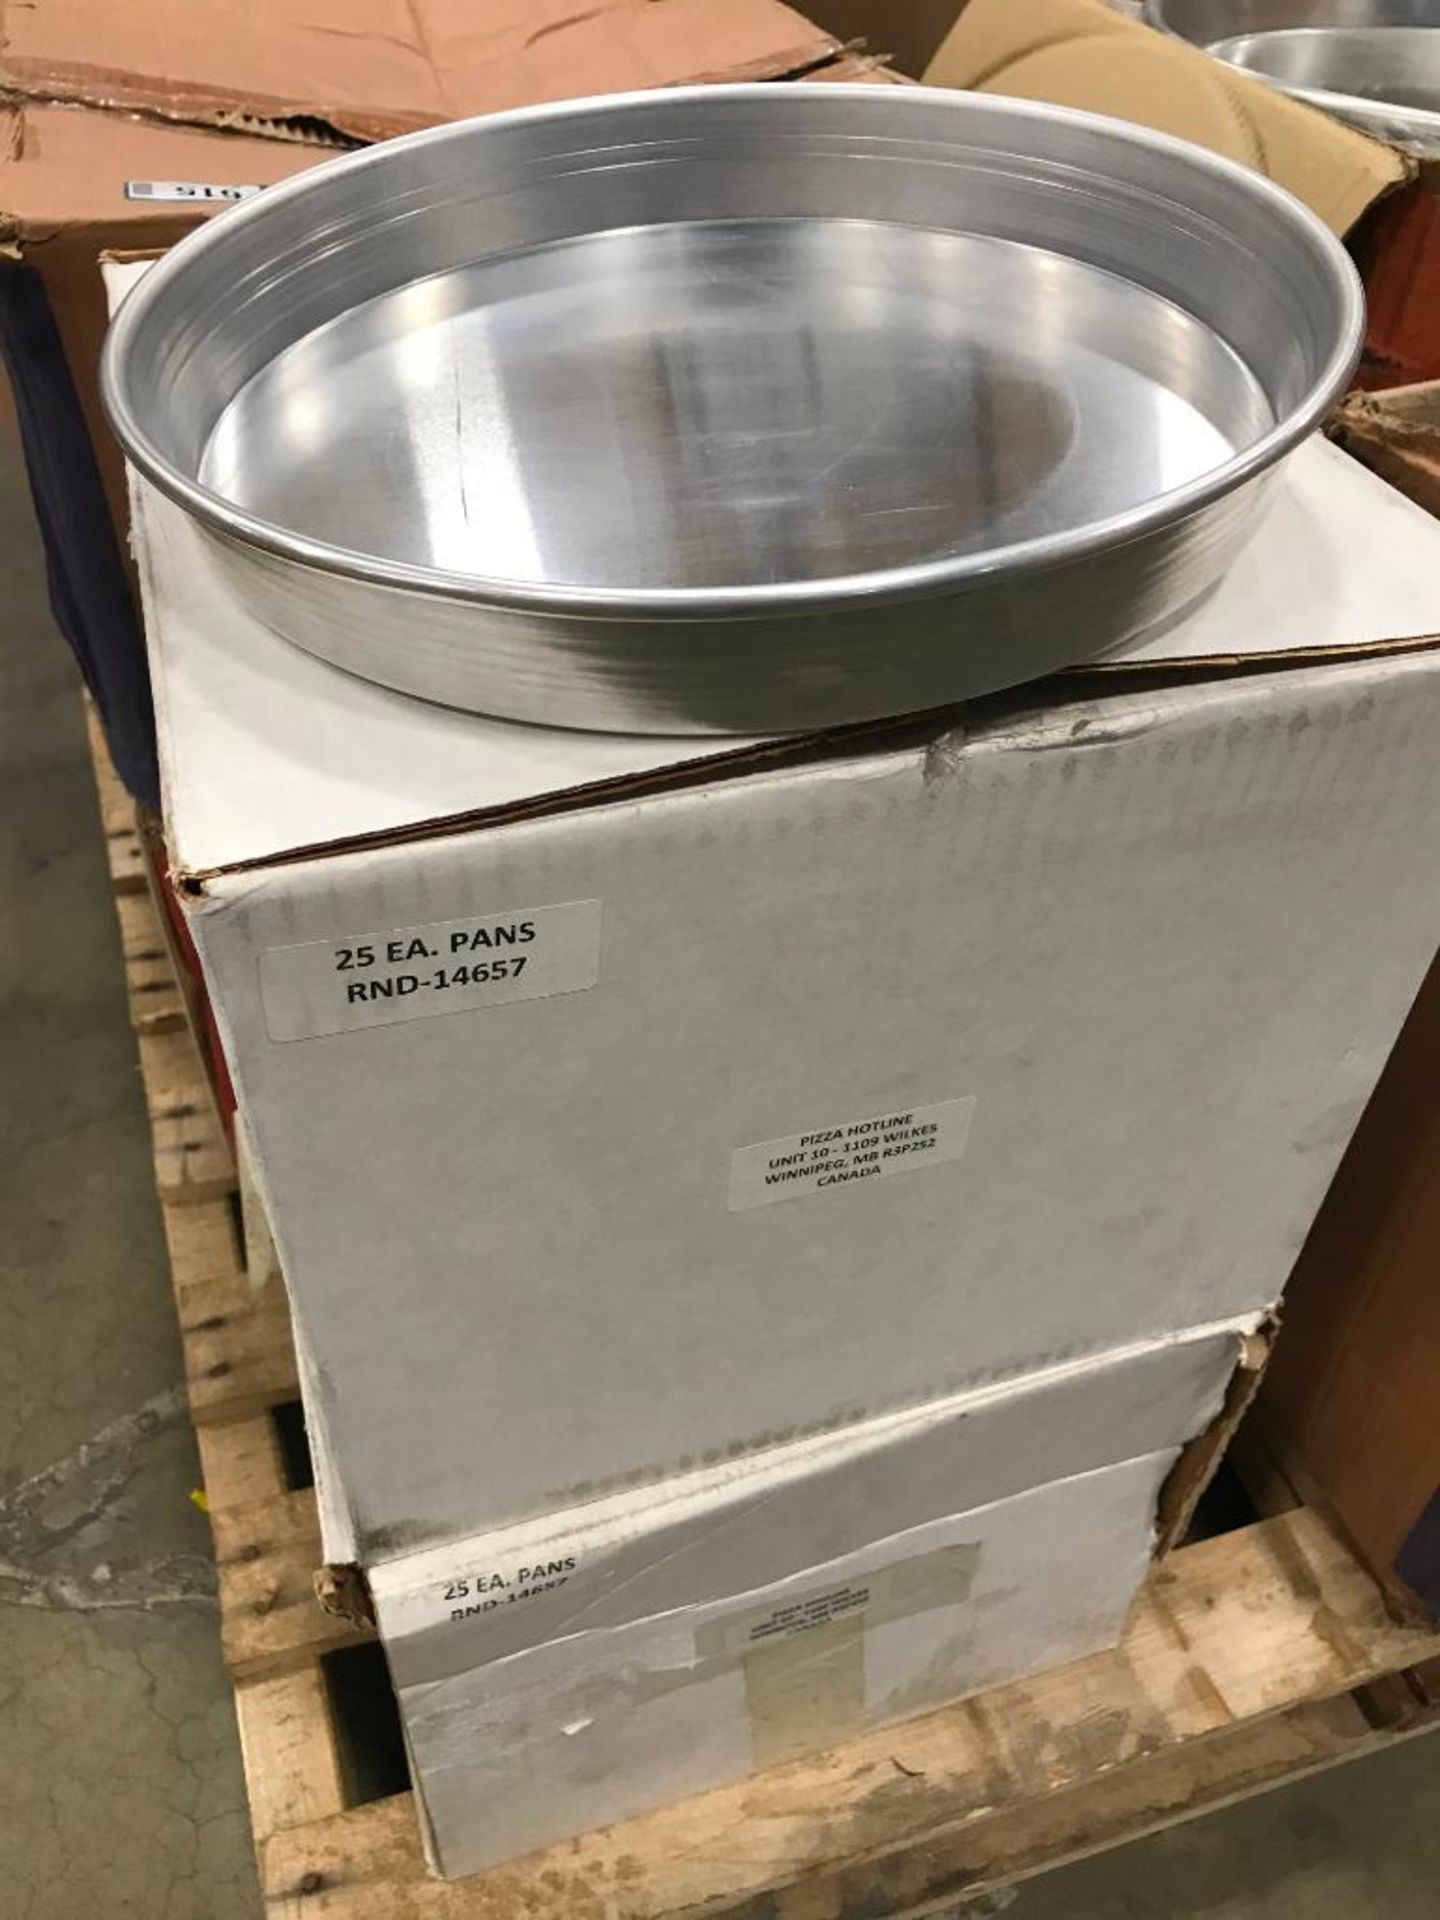 TWO CASE OF 11" PIZZA PANS - 25 PANS PER CASE - NEW - Image 3 of 3